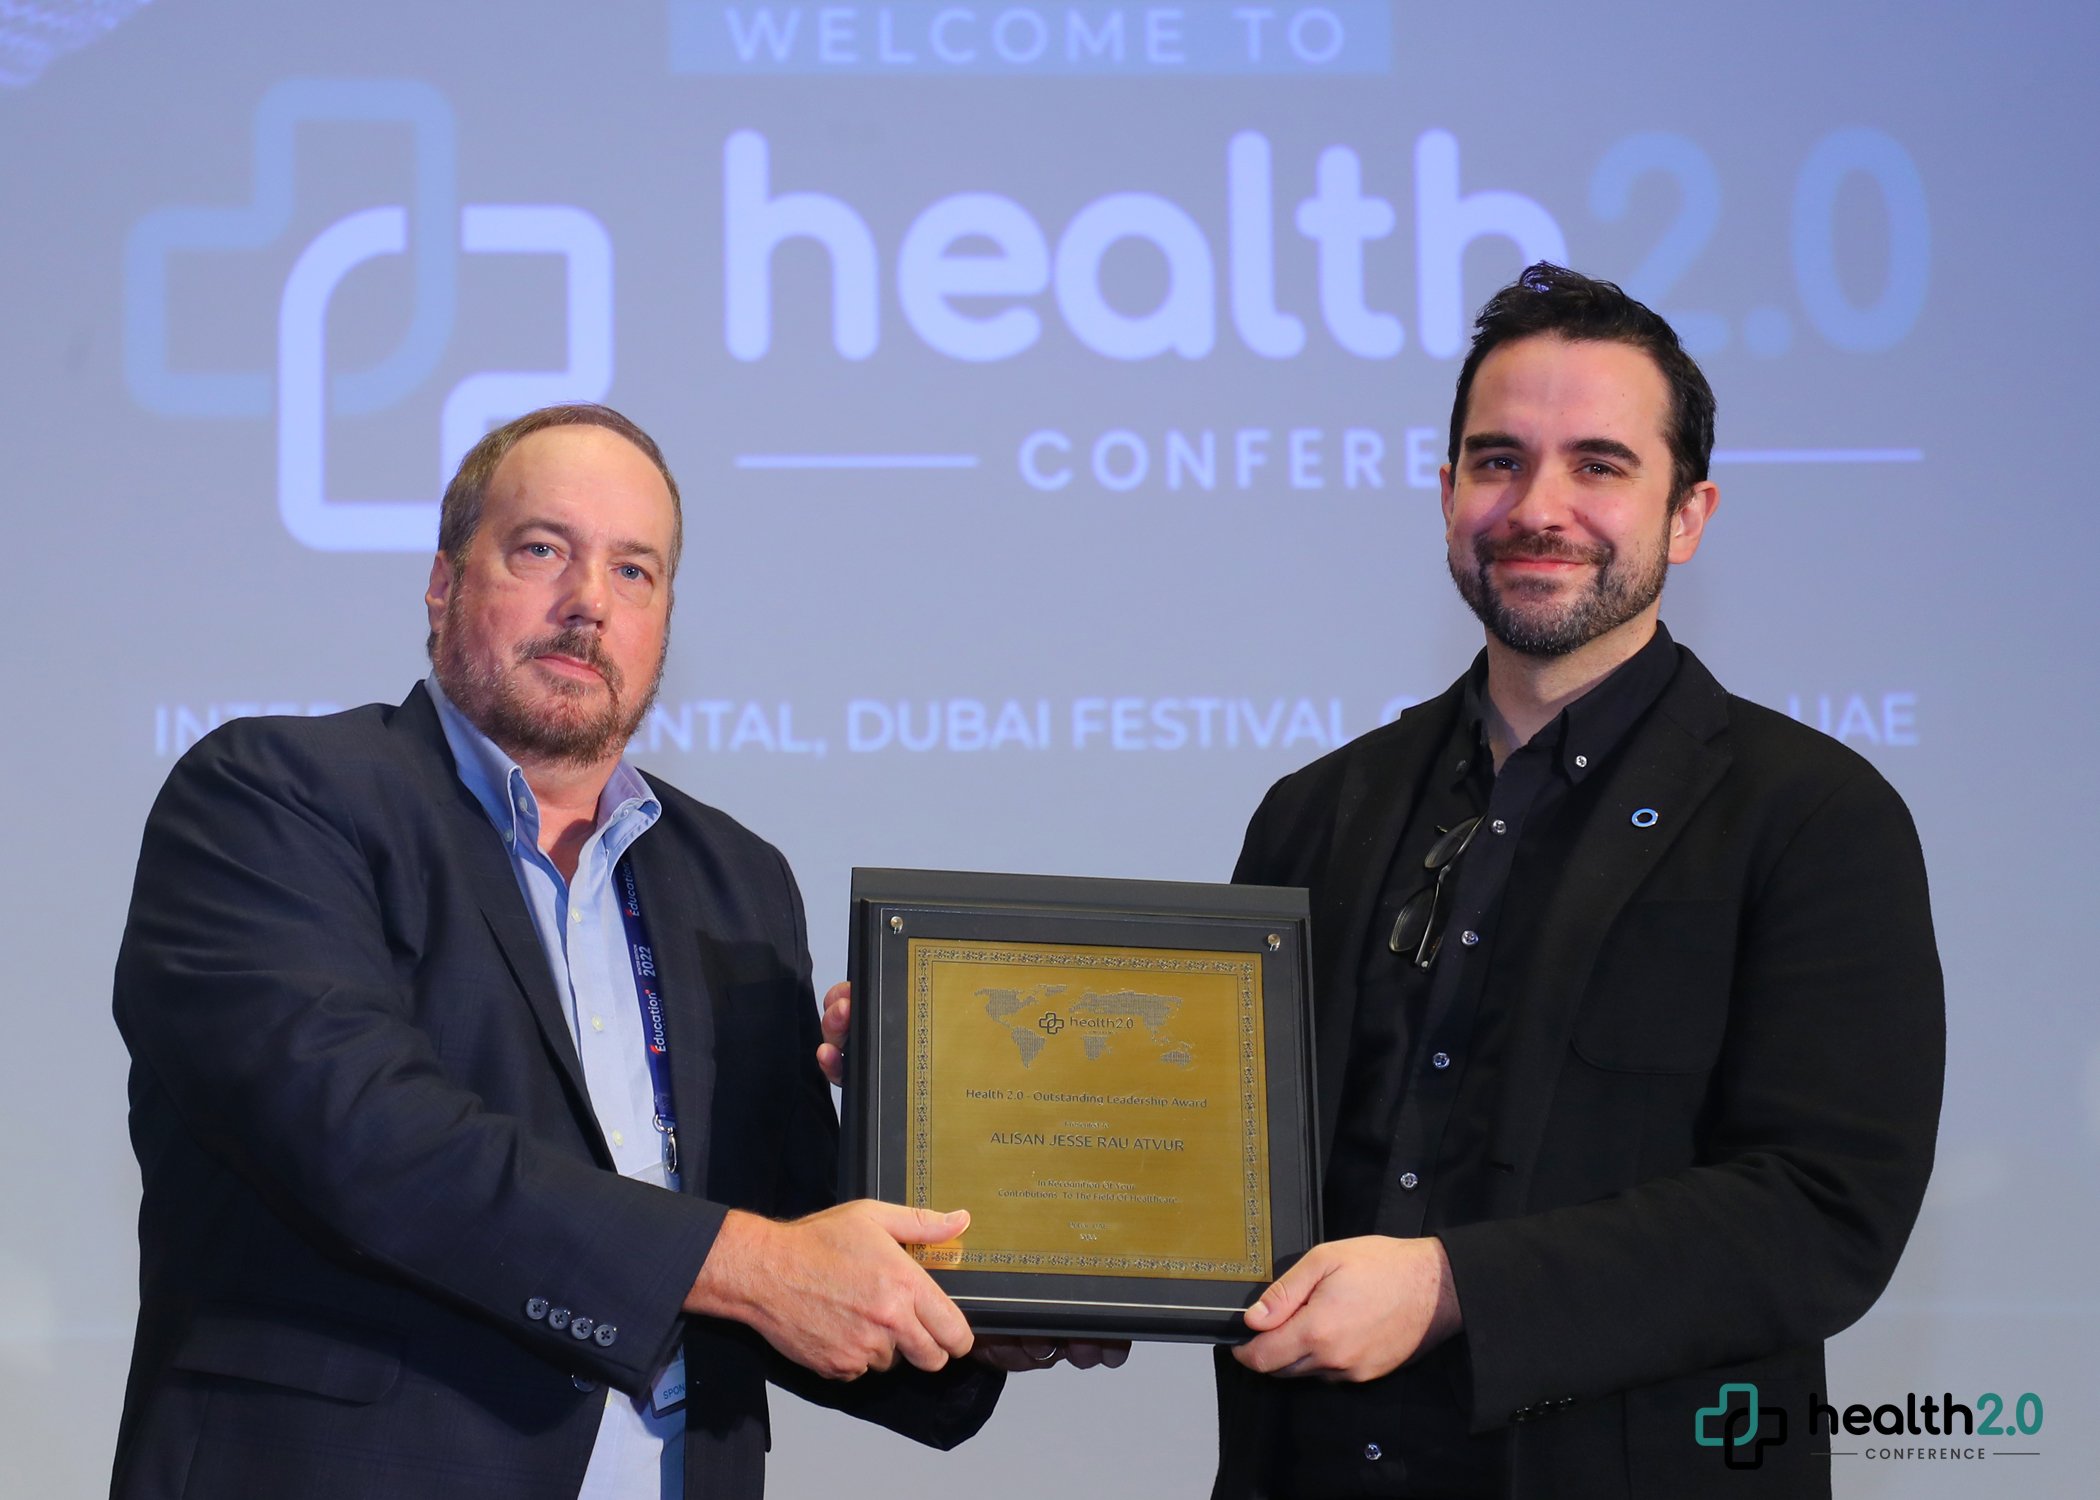  Alisan Atvur accepts award for "Outstanding Leadership in Healthcare" Award at the 2022 Health 2.0 Conference in Dubai 